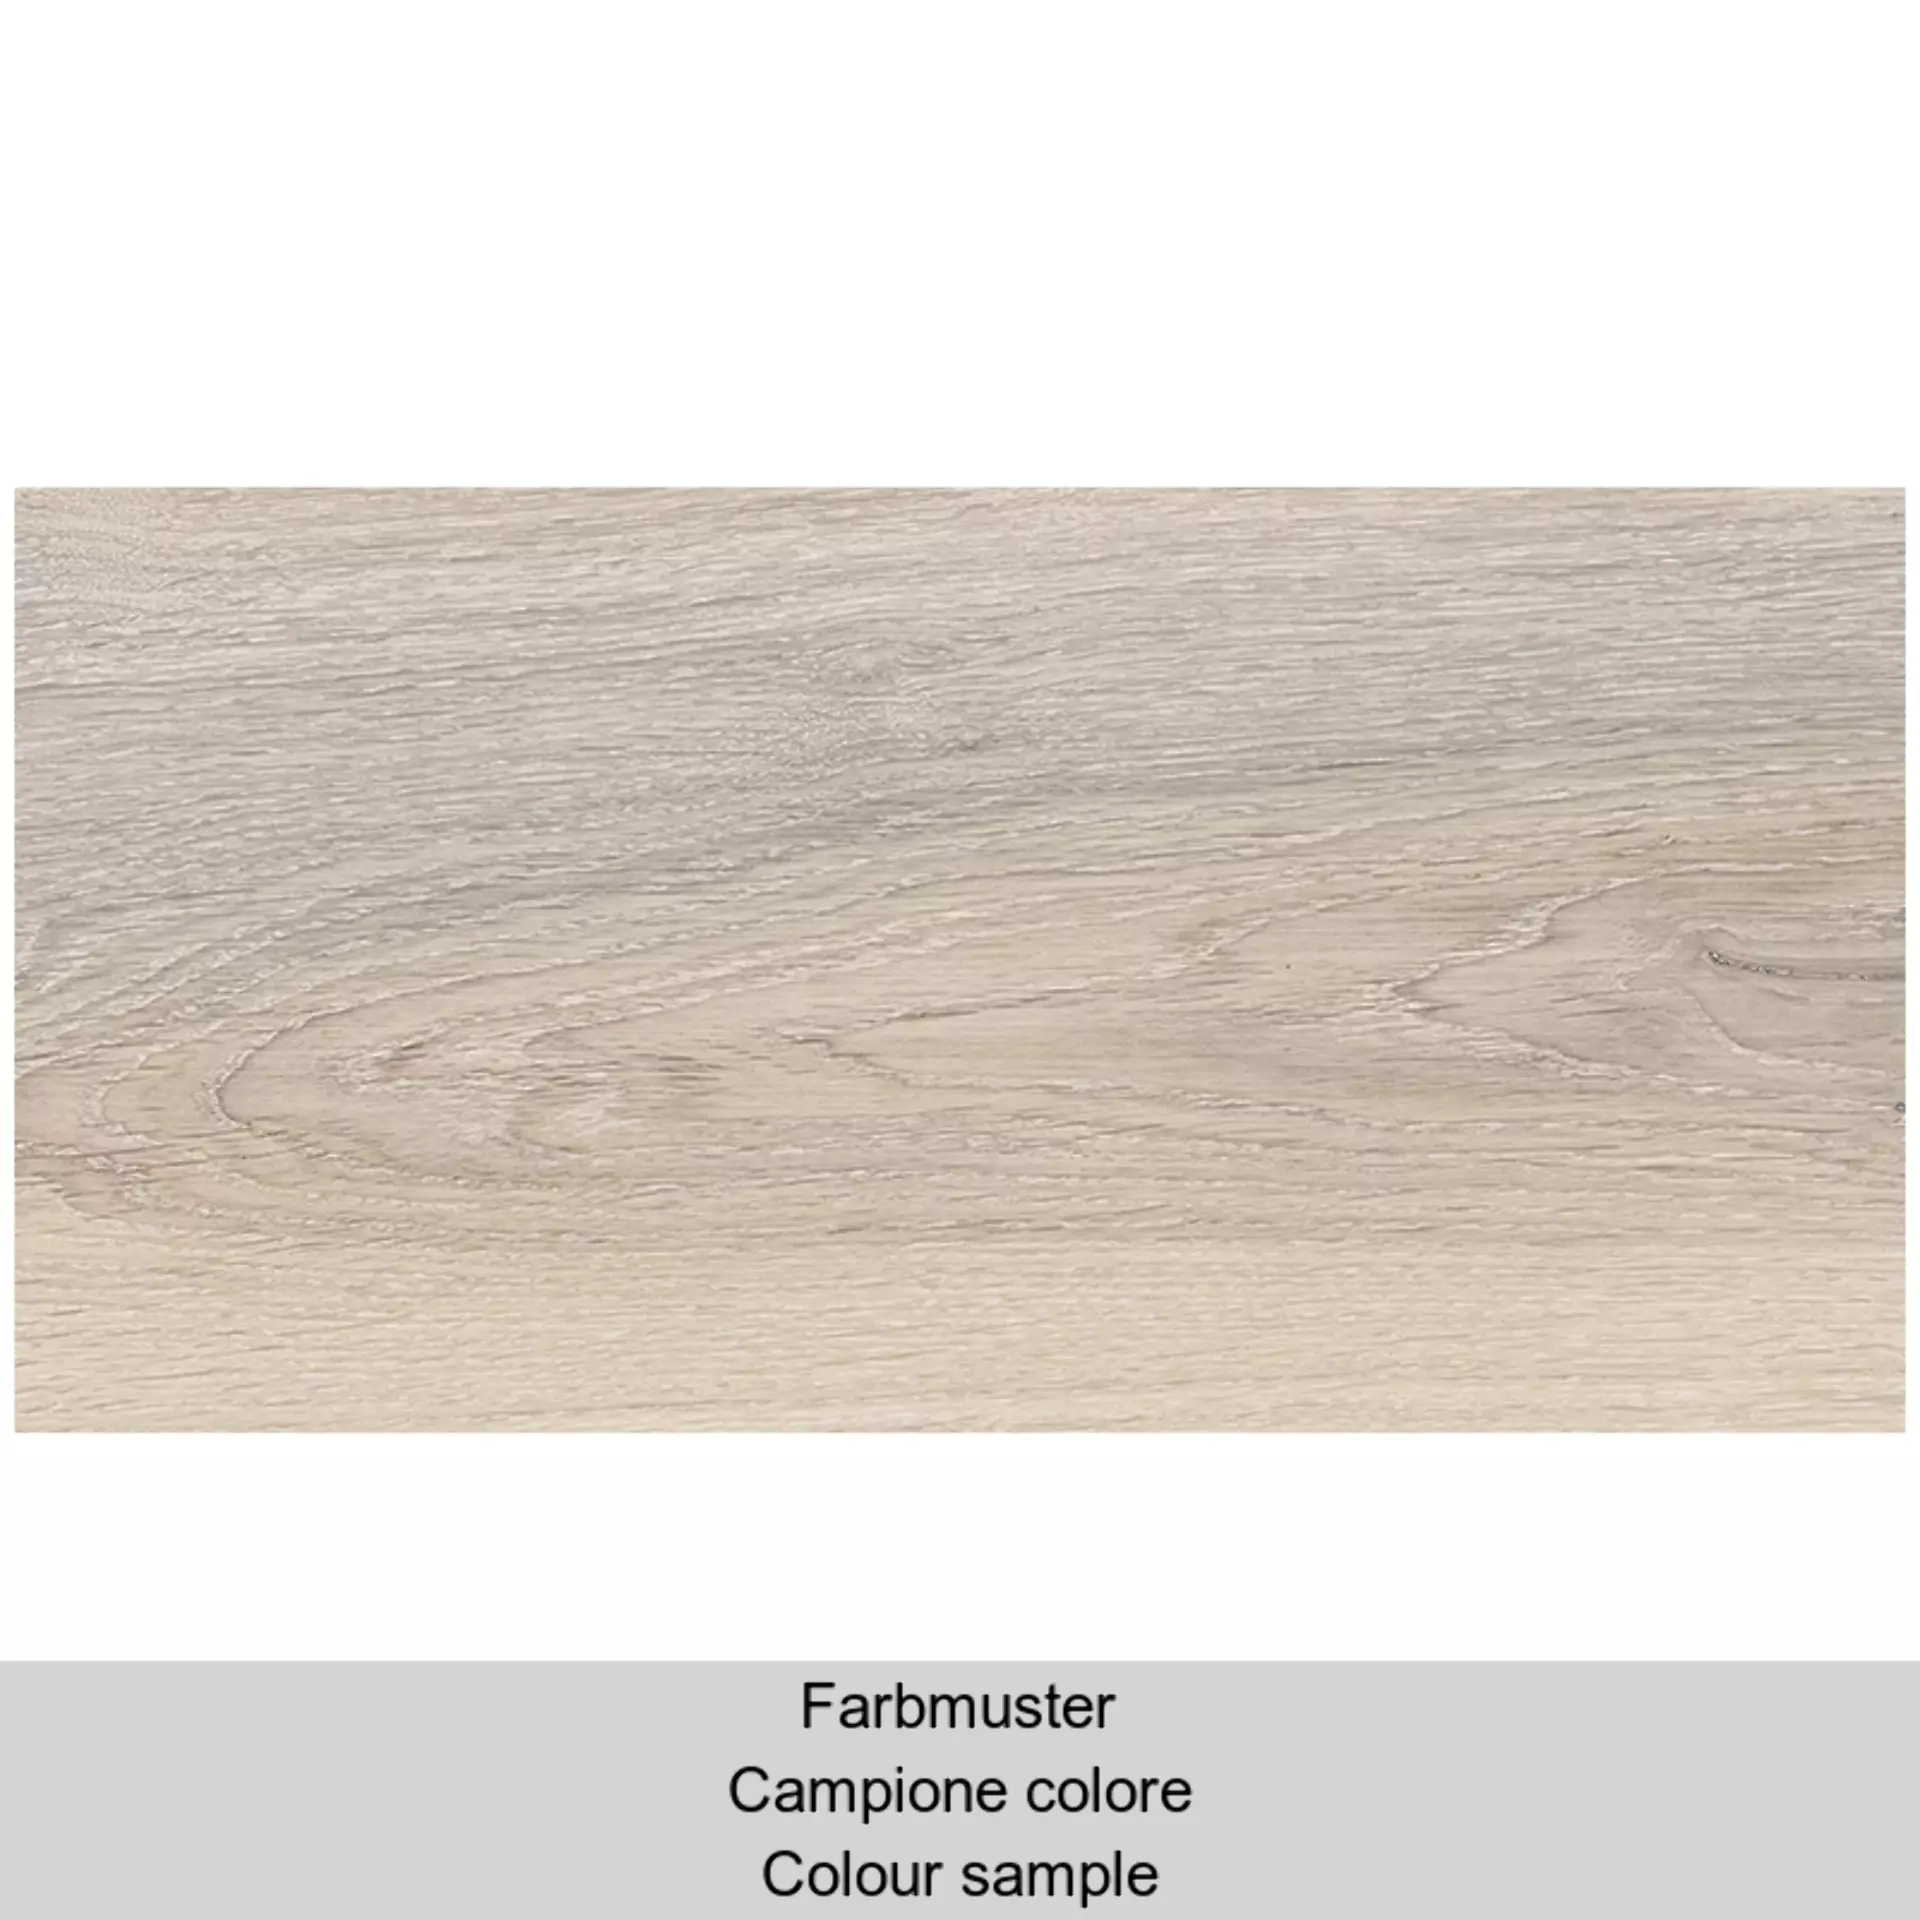 ABK Eco-Chic Almond Naturale Mix Sizes PF60006771 30x60cm rectified 8,5mm